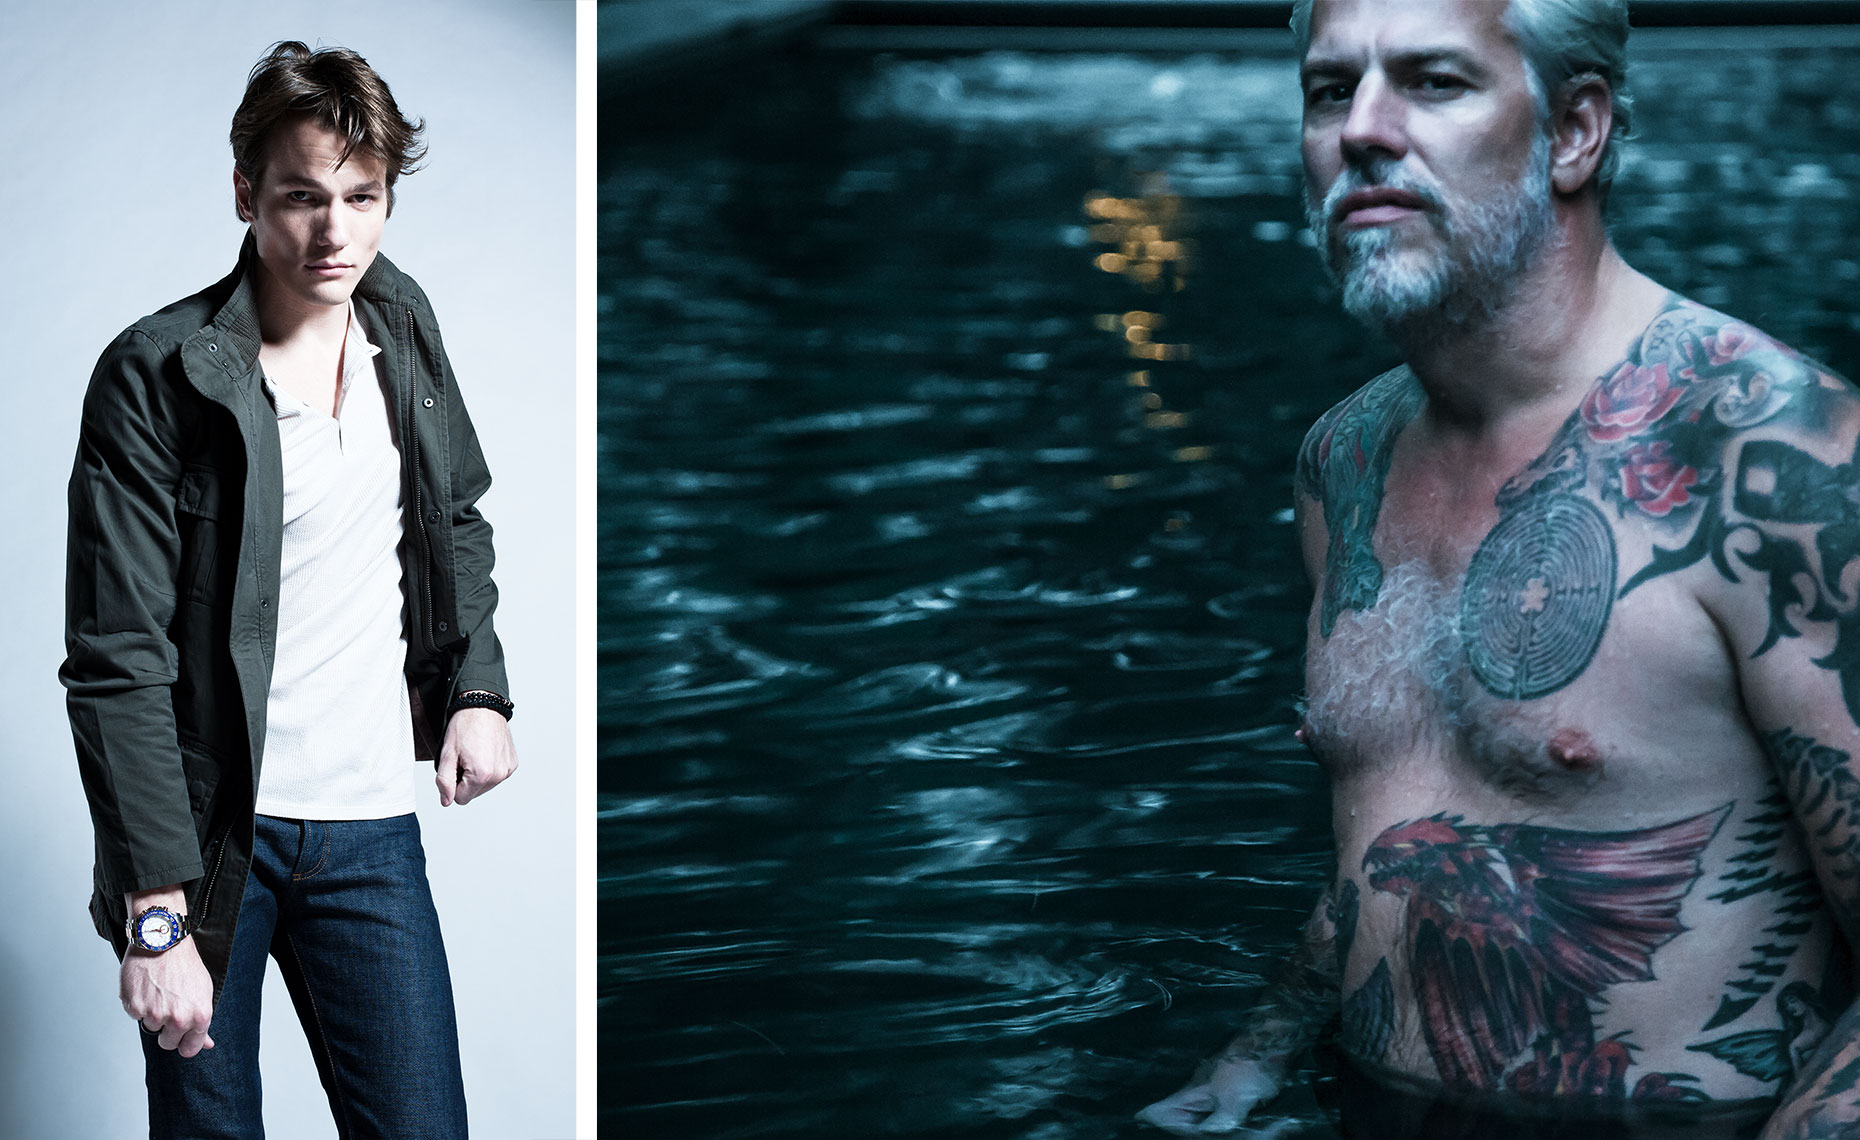 Fashion photo of model colin with dark jacket and watch, as well as heavily tattooed Tom in Pool